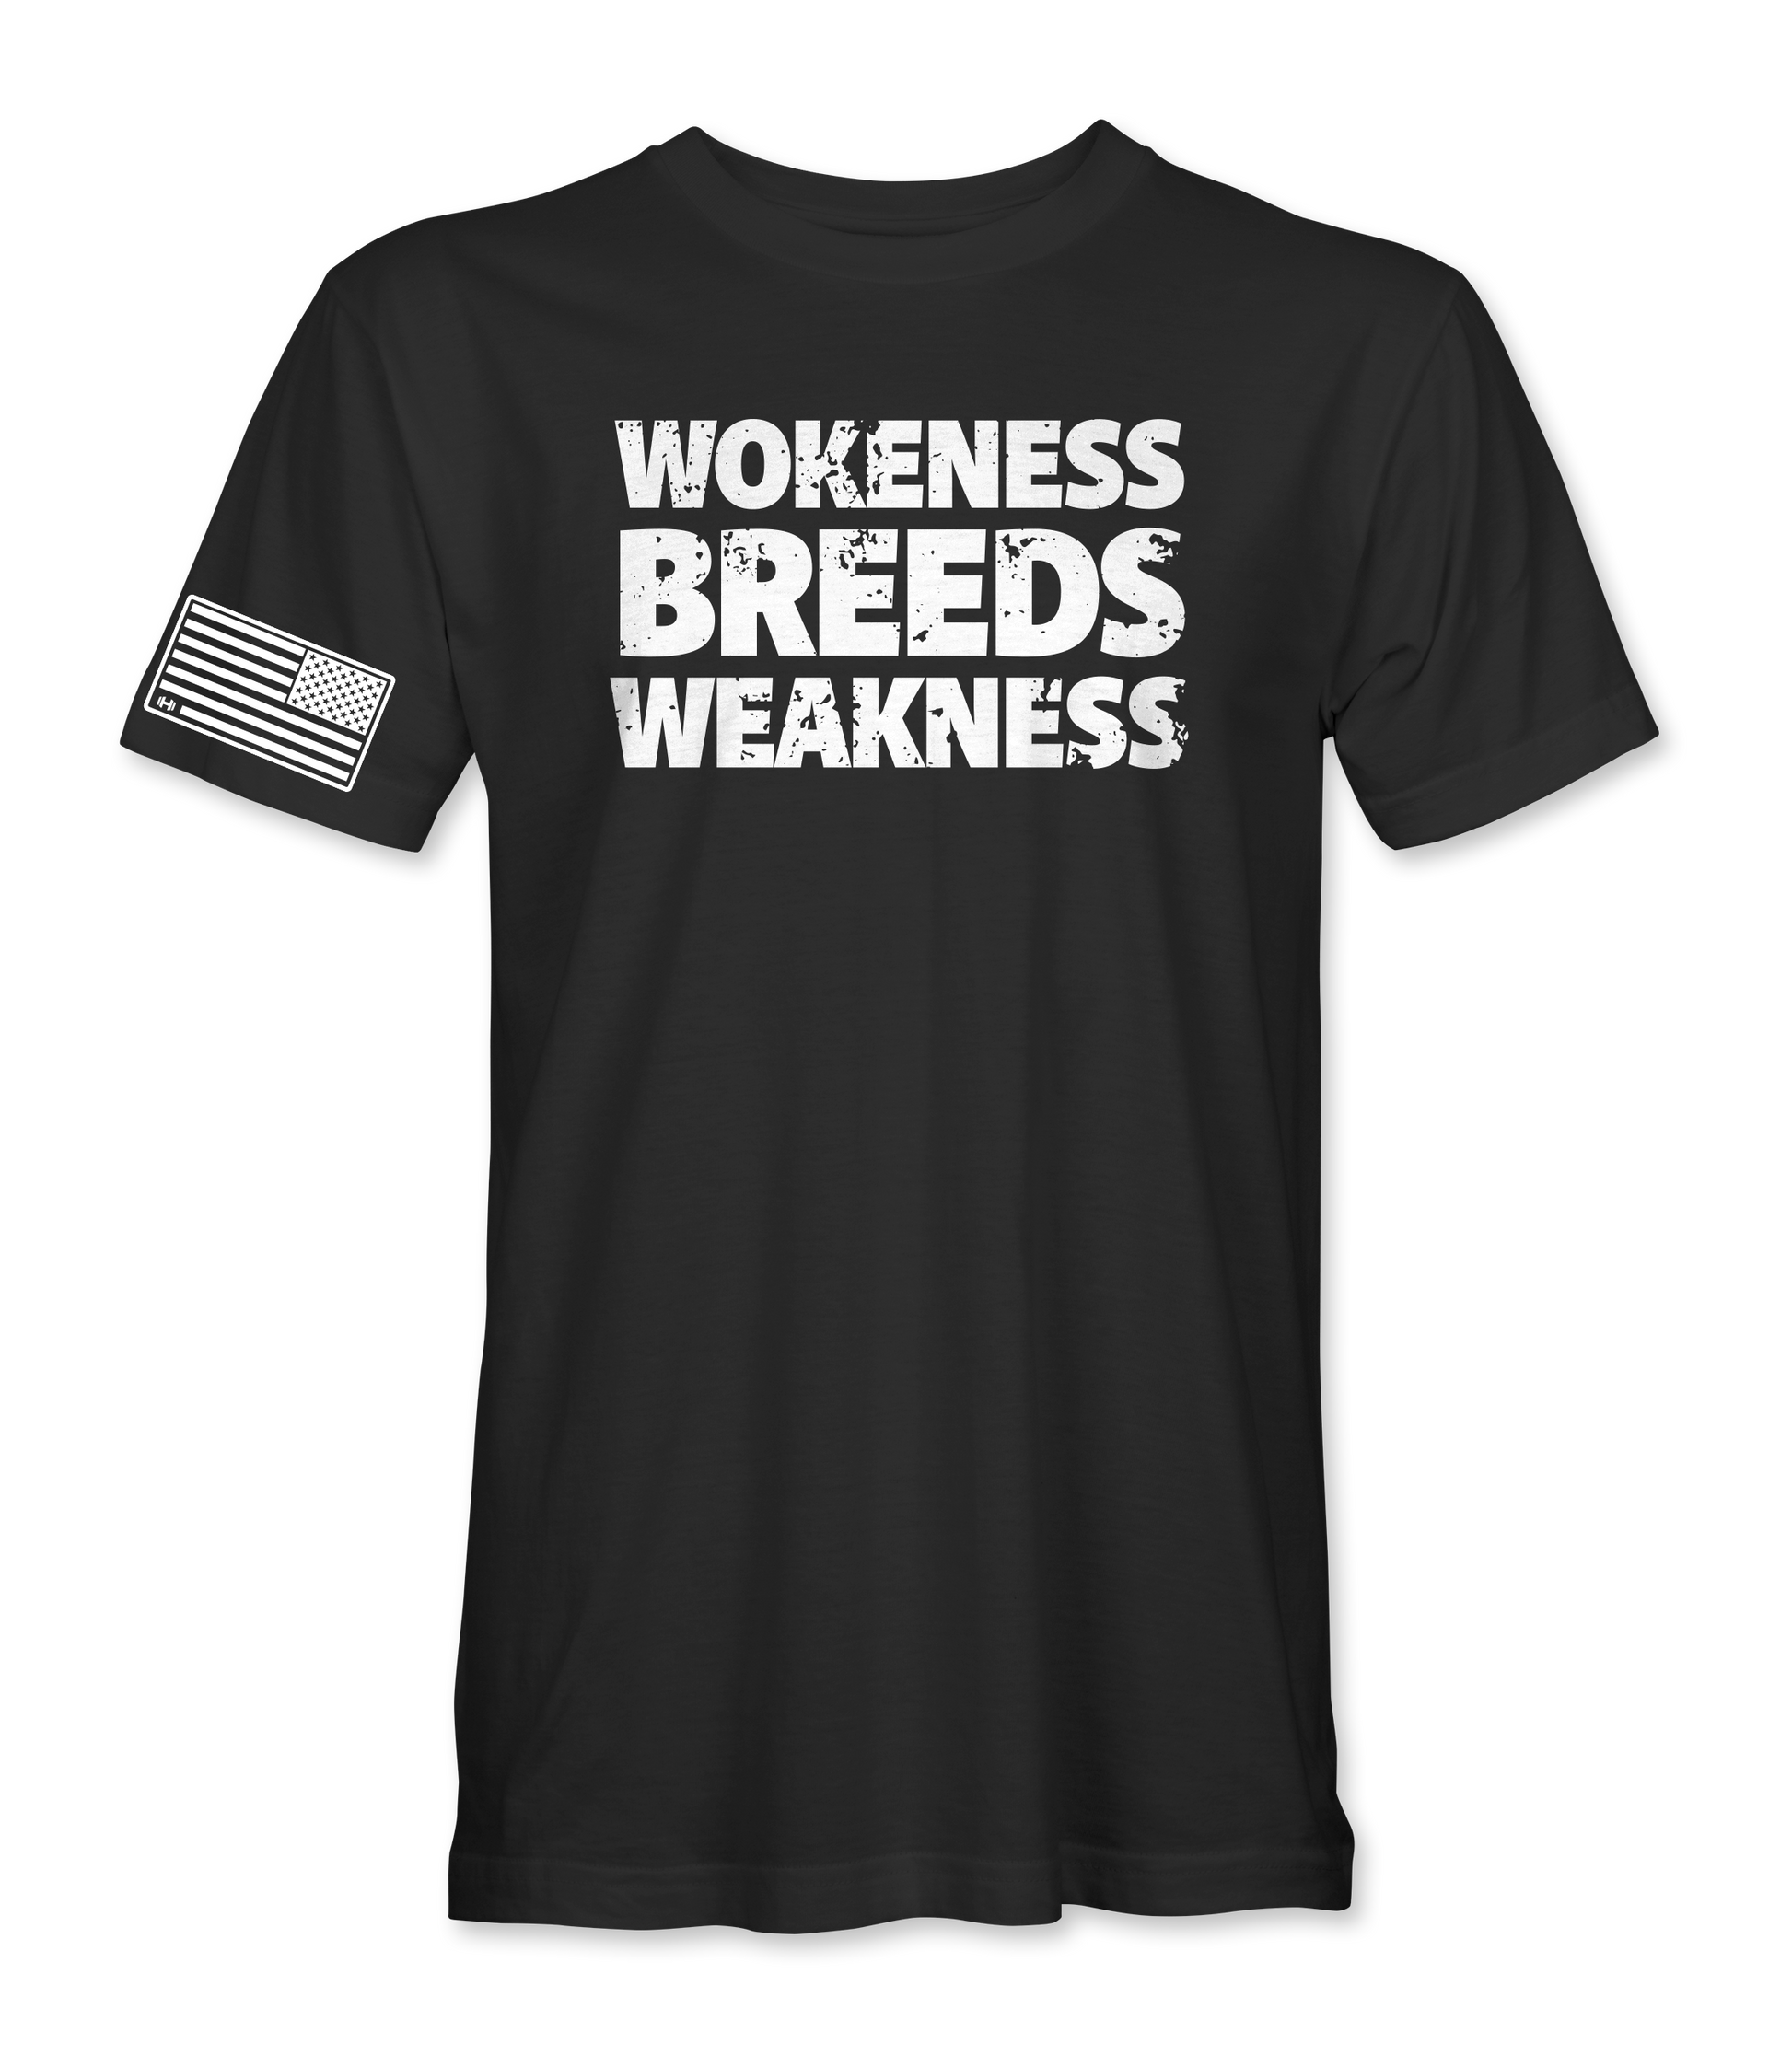 Picture of a black shirt with white writing that reads Wokeness Breeds Weakness in white block letters